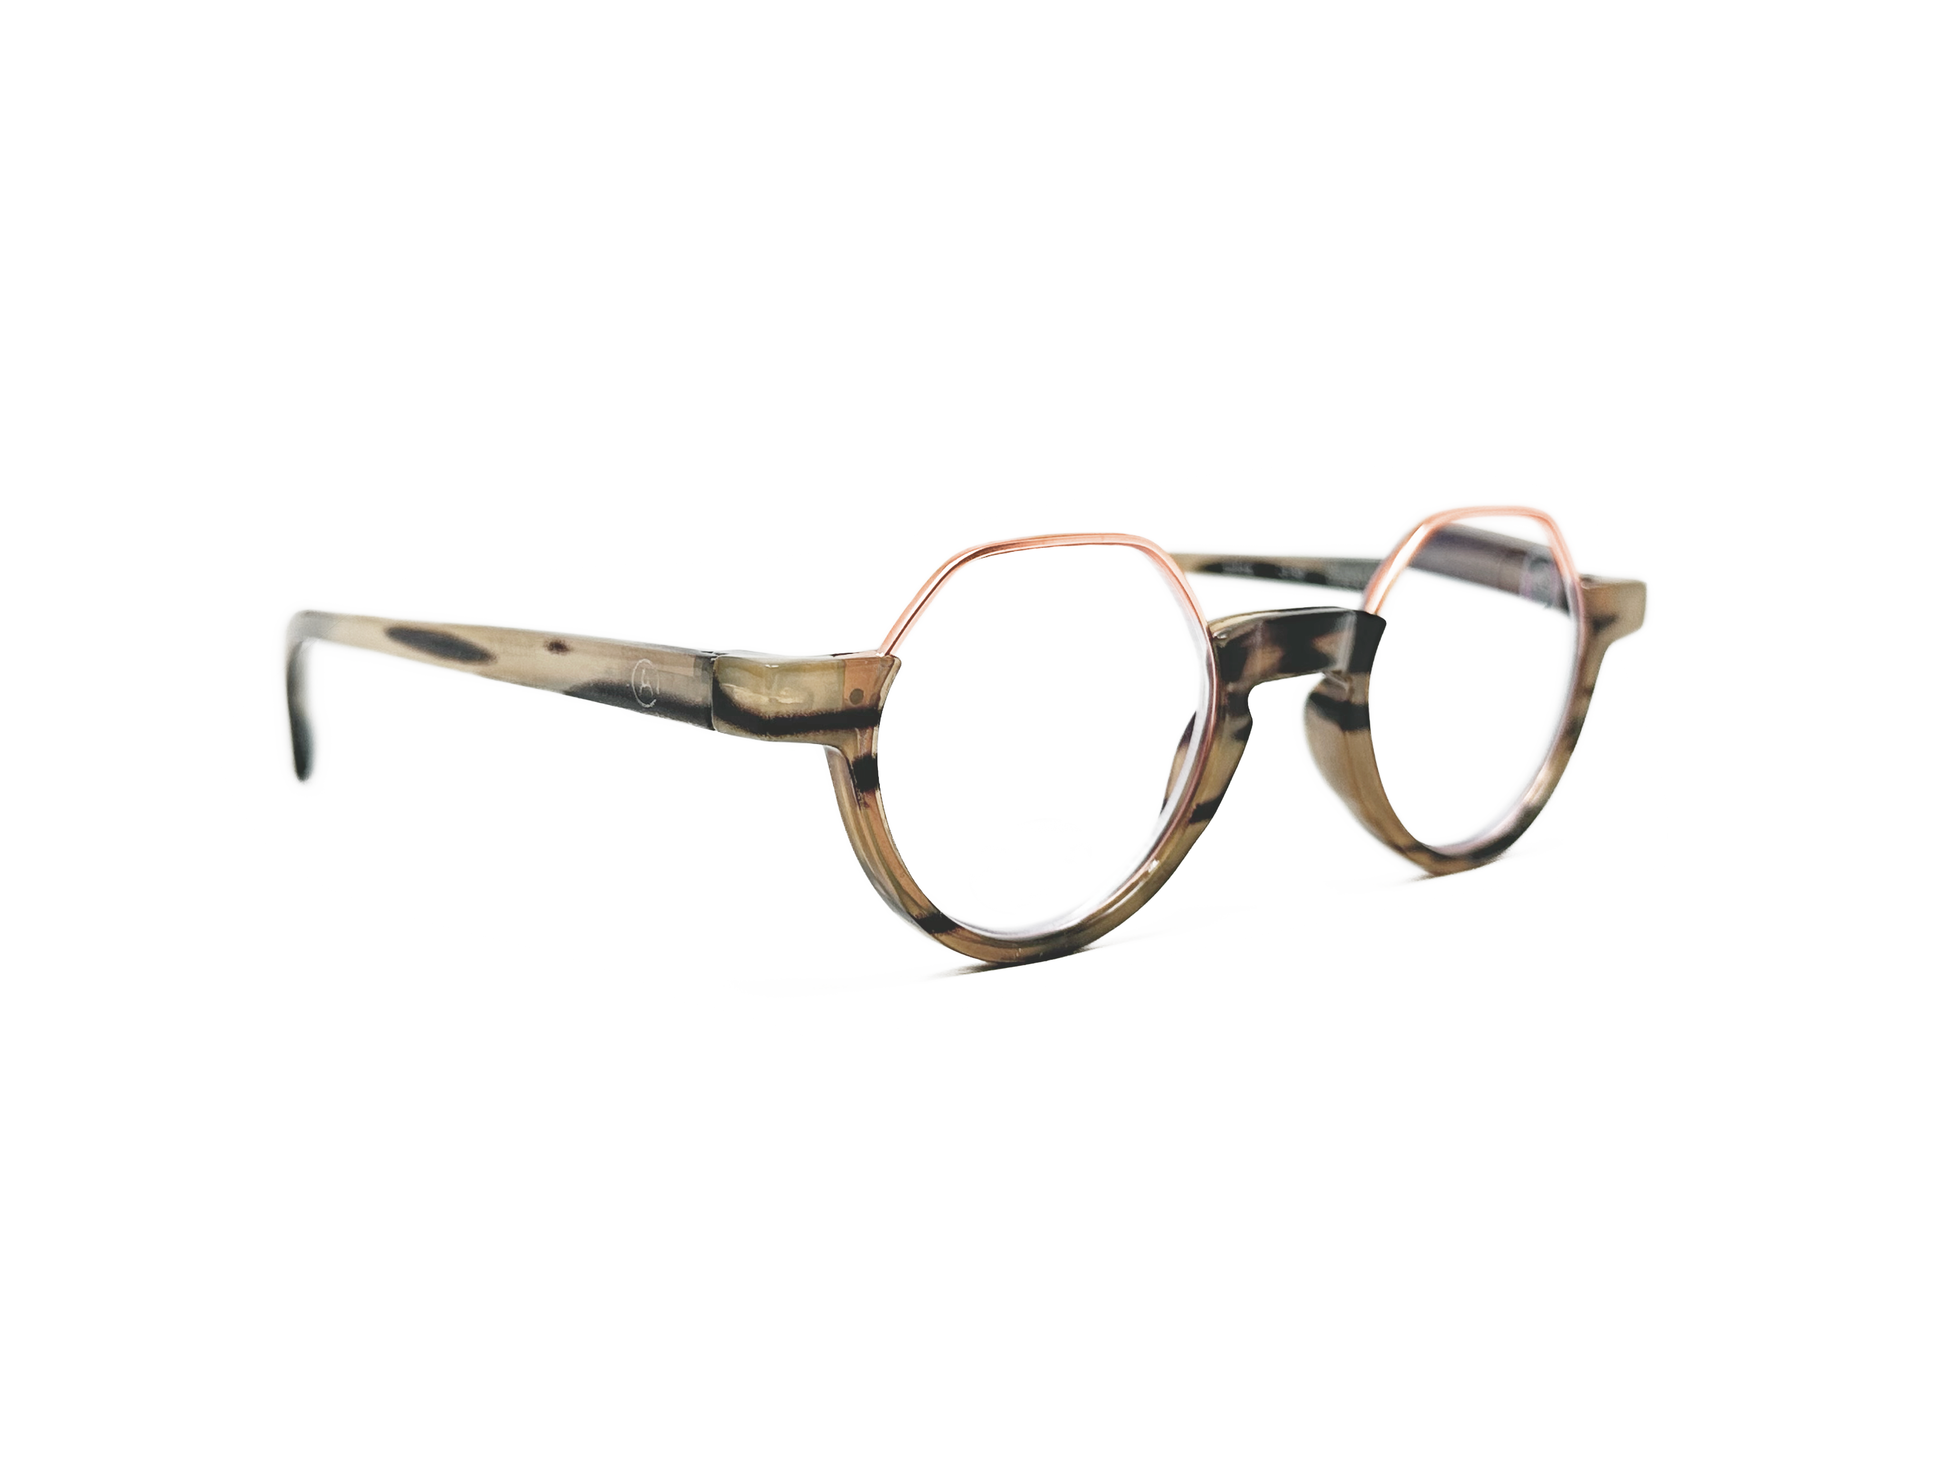 Aptica round acetate reader with flattop. Model: Rituals. Color: Natural Buffalo Horn - Beige buffalo horn with rose gold trim on top. Side view.